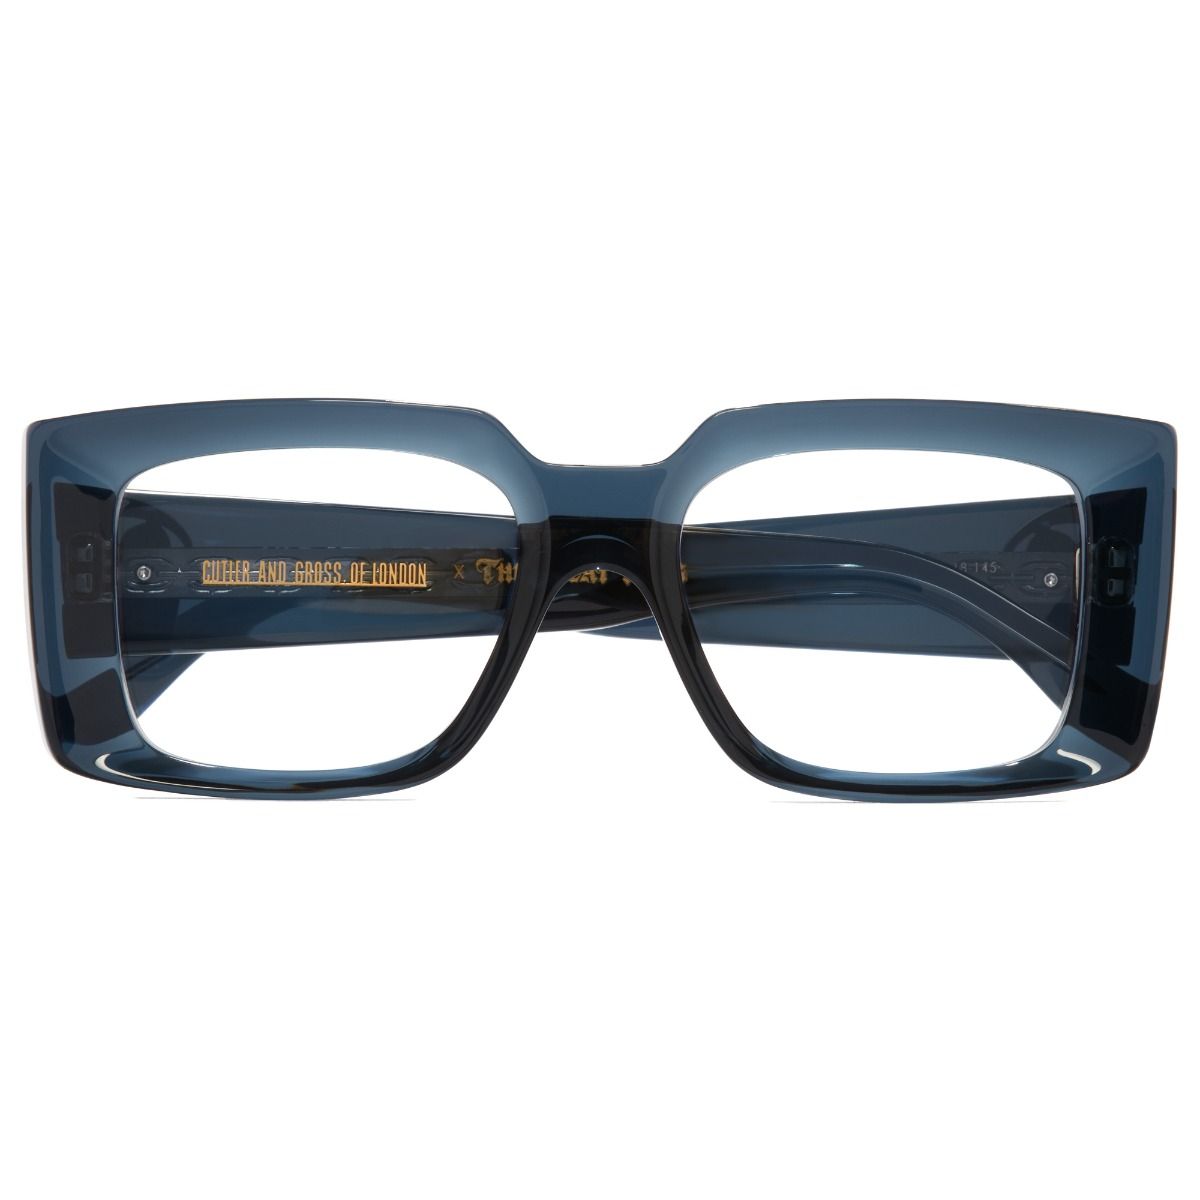 The Great Frog Mini Reaper Square Optical Glasses-Deep Blue Crystal